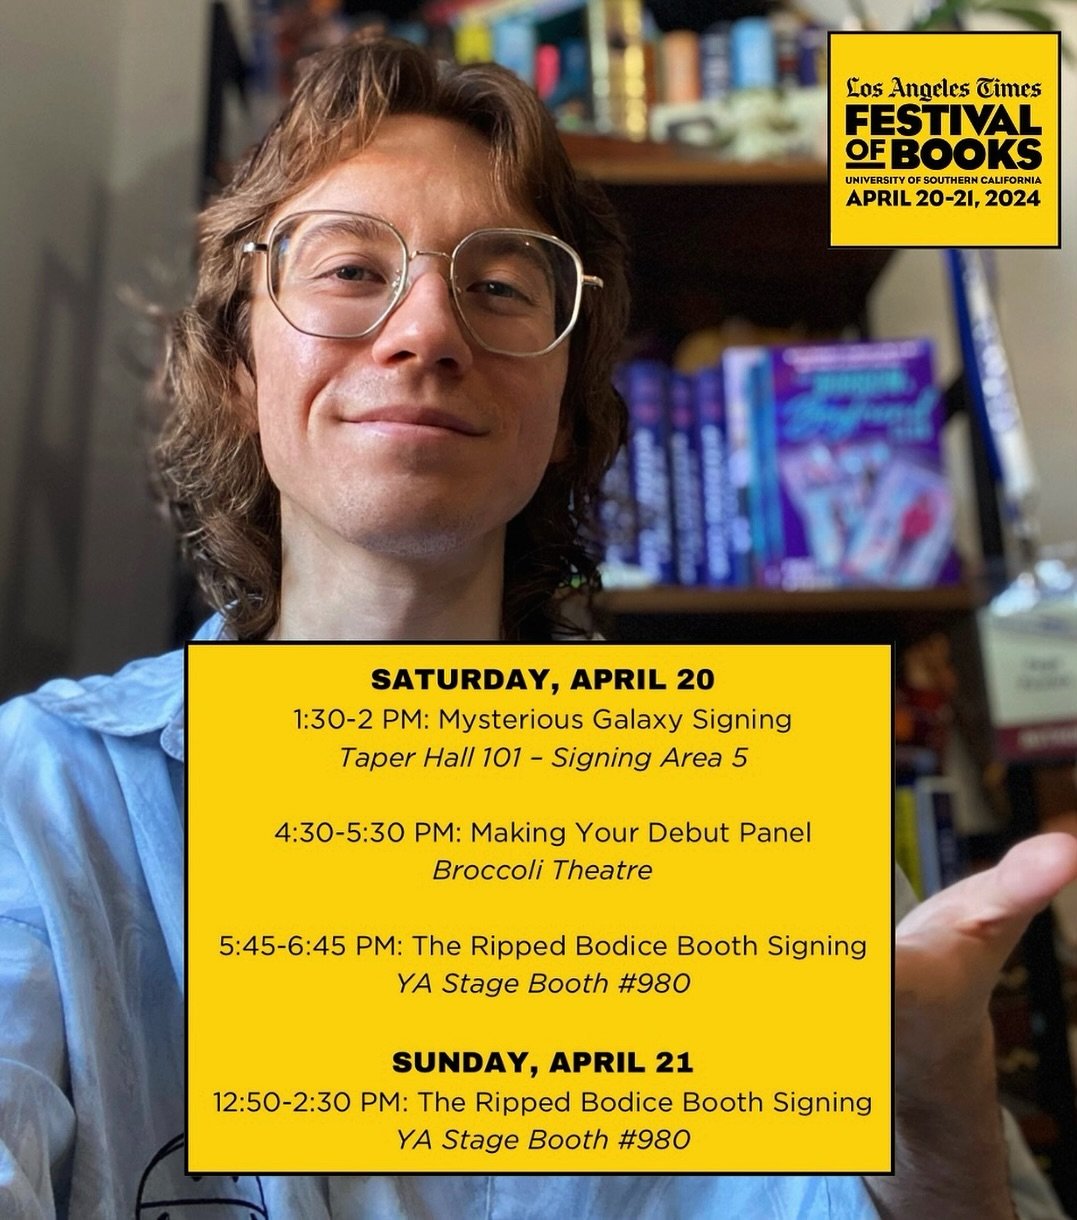 HANG OUT WITH ME AT LA TIMES FESTIVAL OF BOOKS THIS WEEKEND OR ELSE